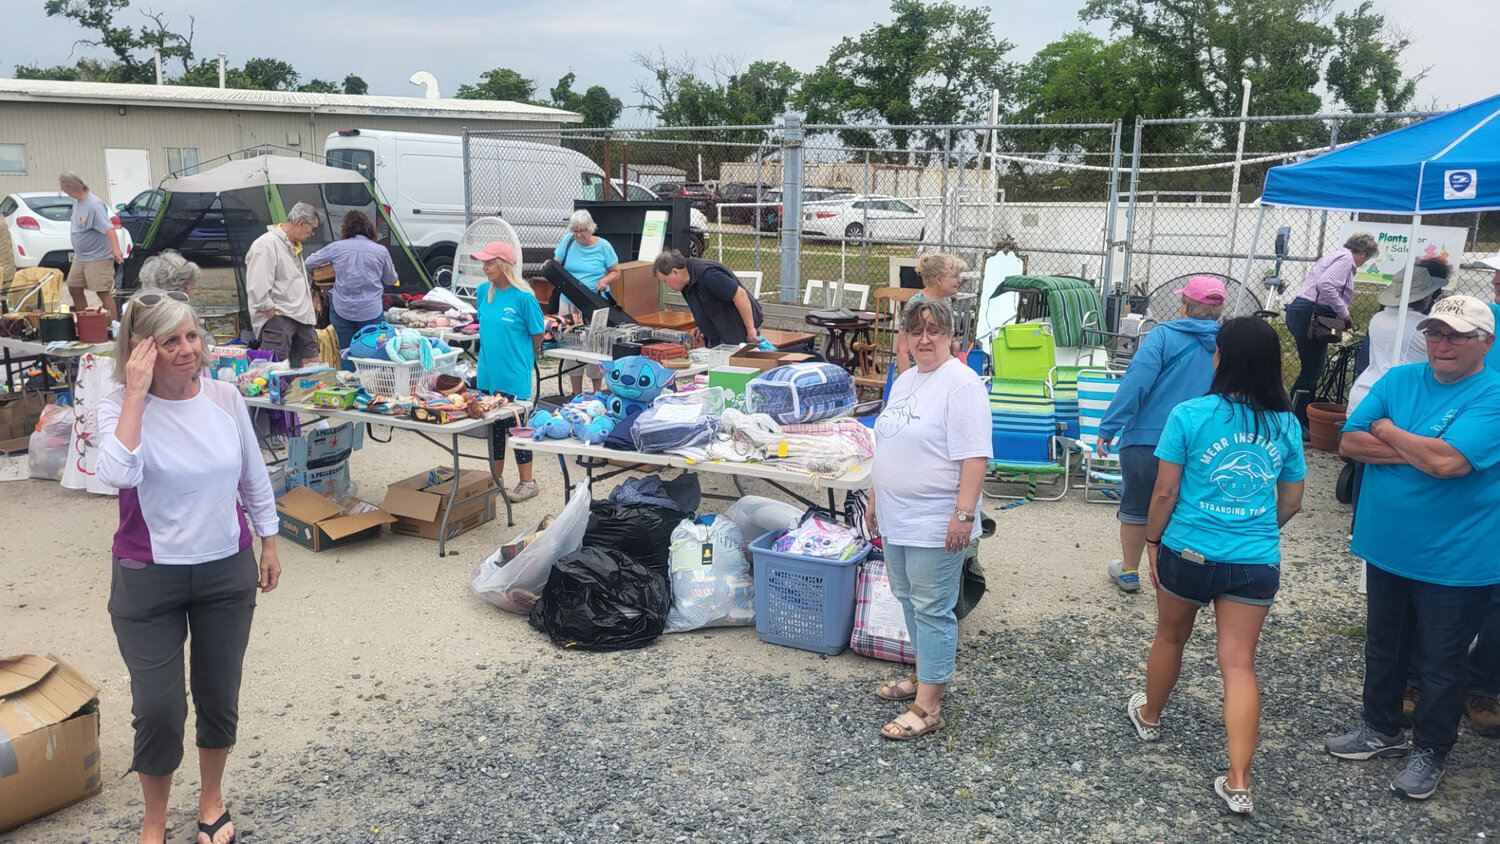 All funds raised during the Marine Education, Research and Rehabilitation Institute, Inc. (MERR) yard sale will go to the year-round efforts of the non-profit organization.